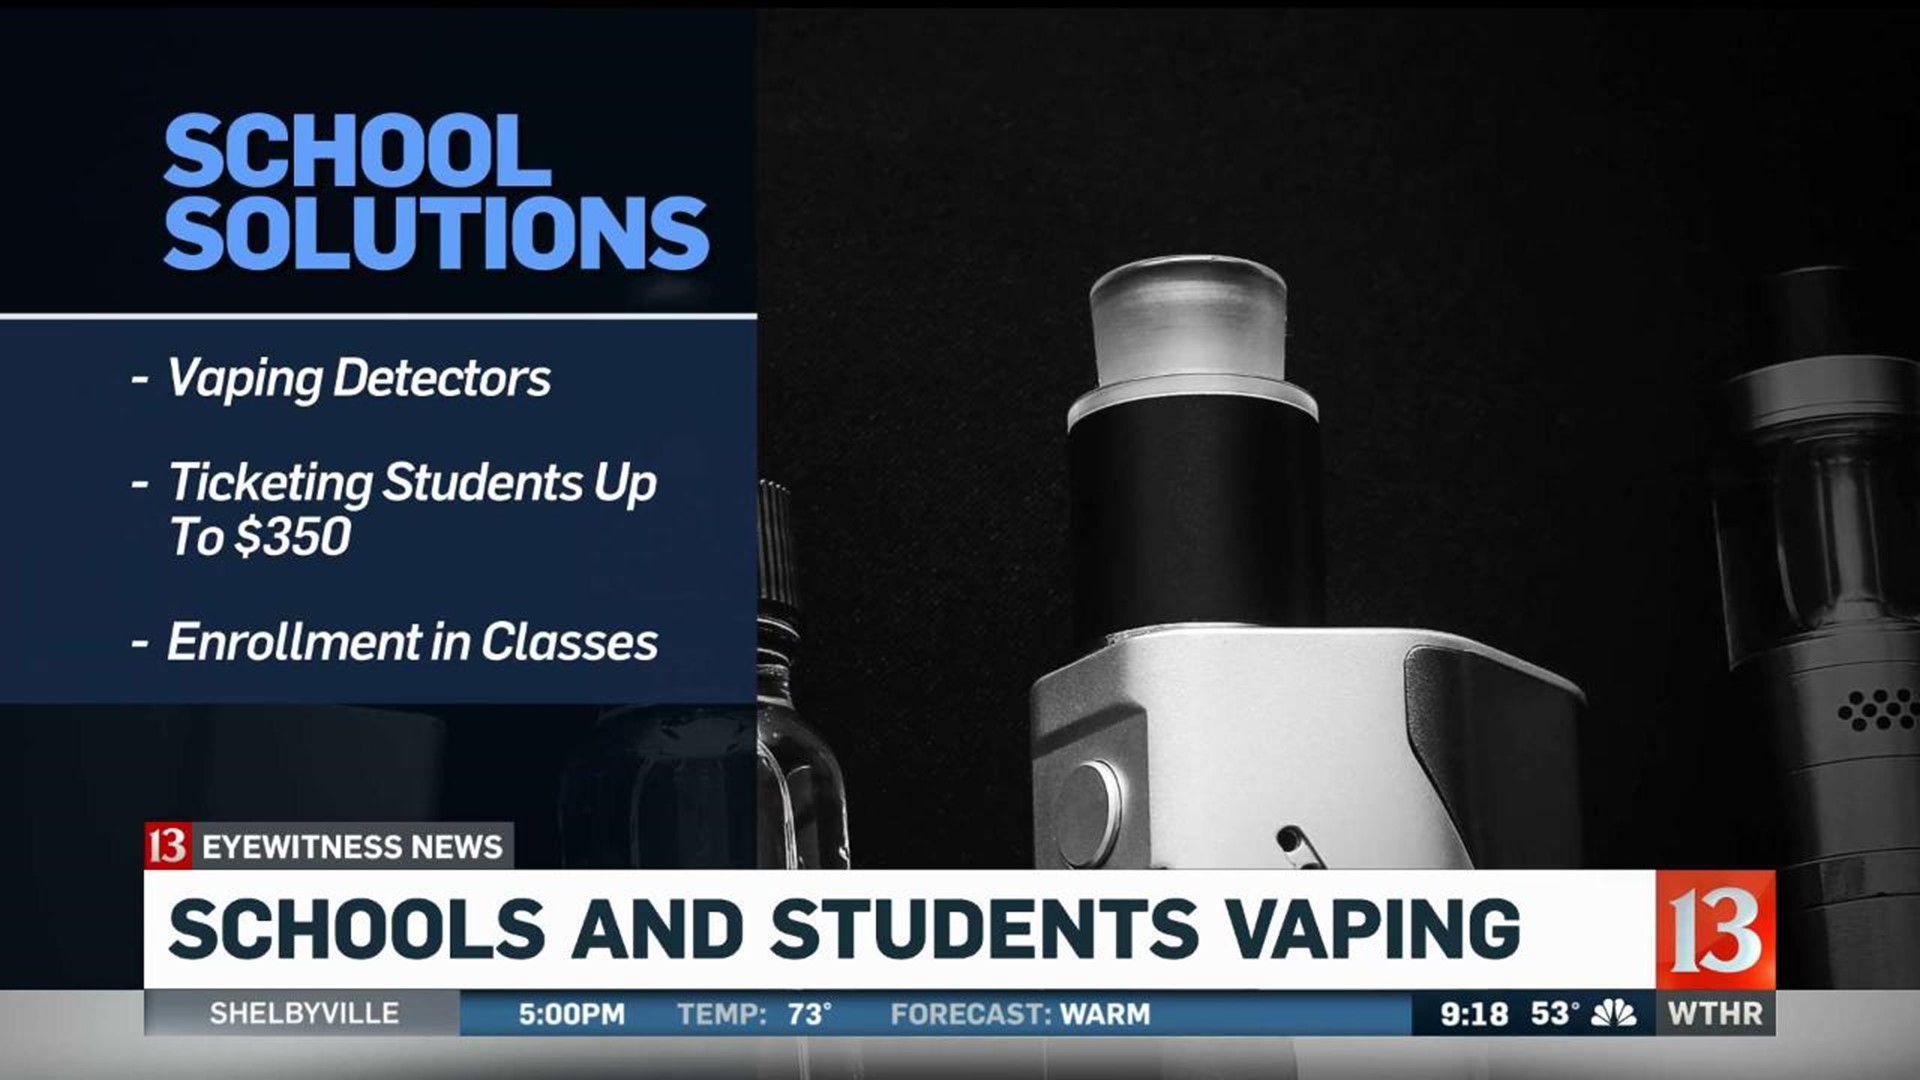 Schools in Session Vaping